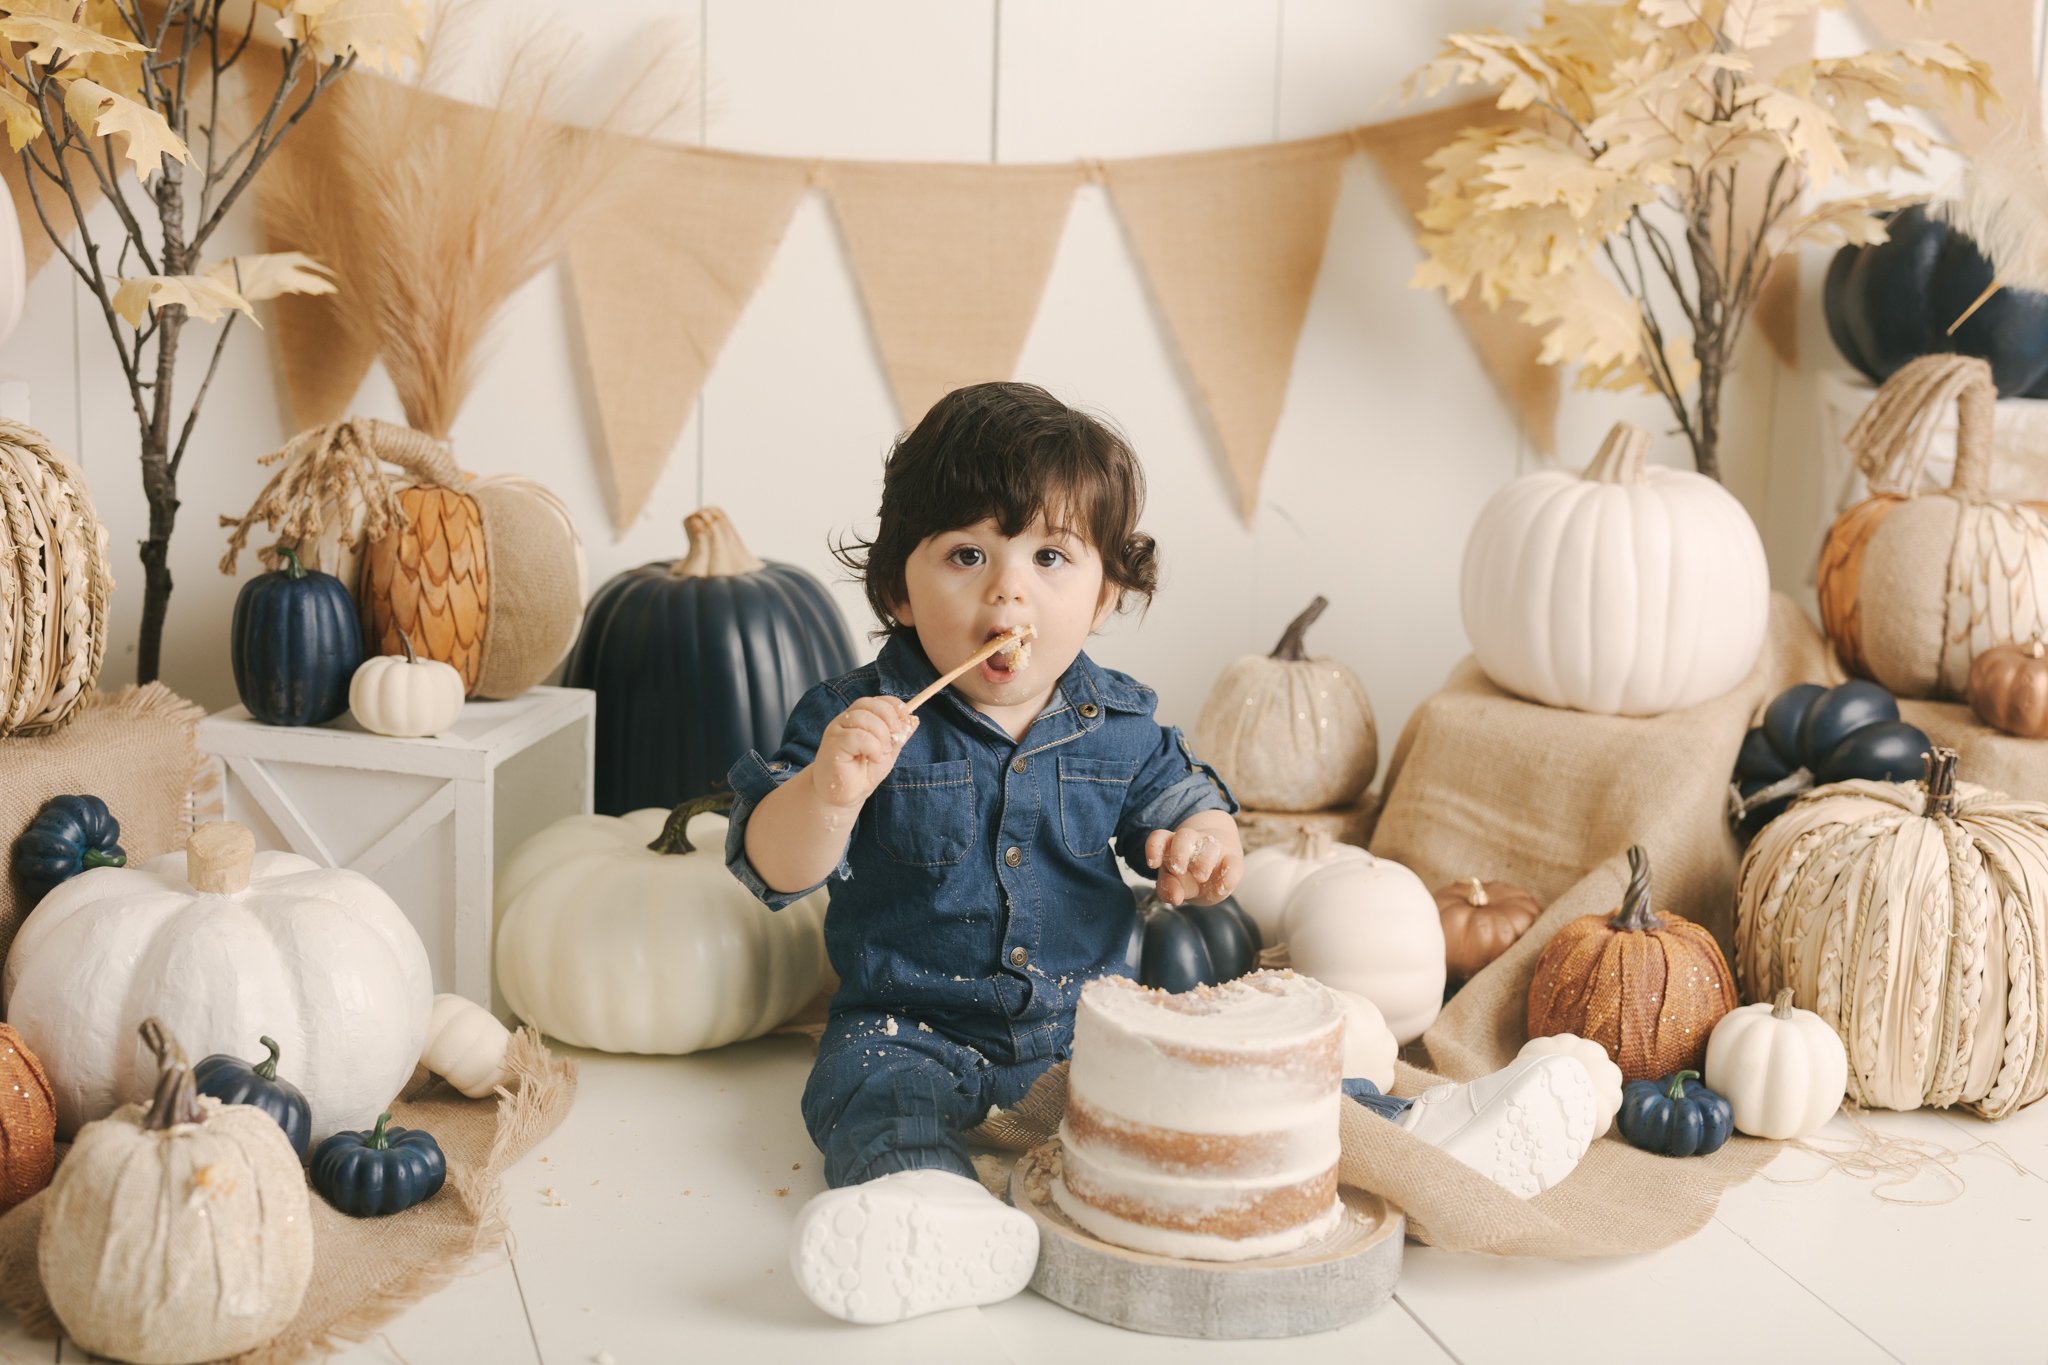 Fall_Pumpkins_Neutral_Navy_Ivory_Frist_Birthday_Boy_Smash_and_Splash_Session_Cake_Studio_by_Erika_Child_and_Family_Photographer_for_Christie_Leigh_Photo_in_Cortland_OH_Ohio_Trumbull_County_004.jpg